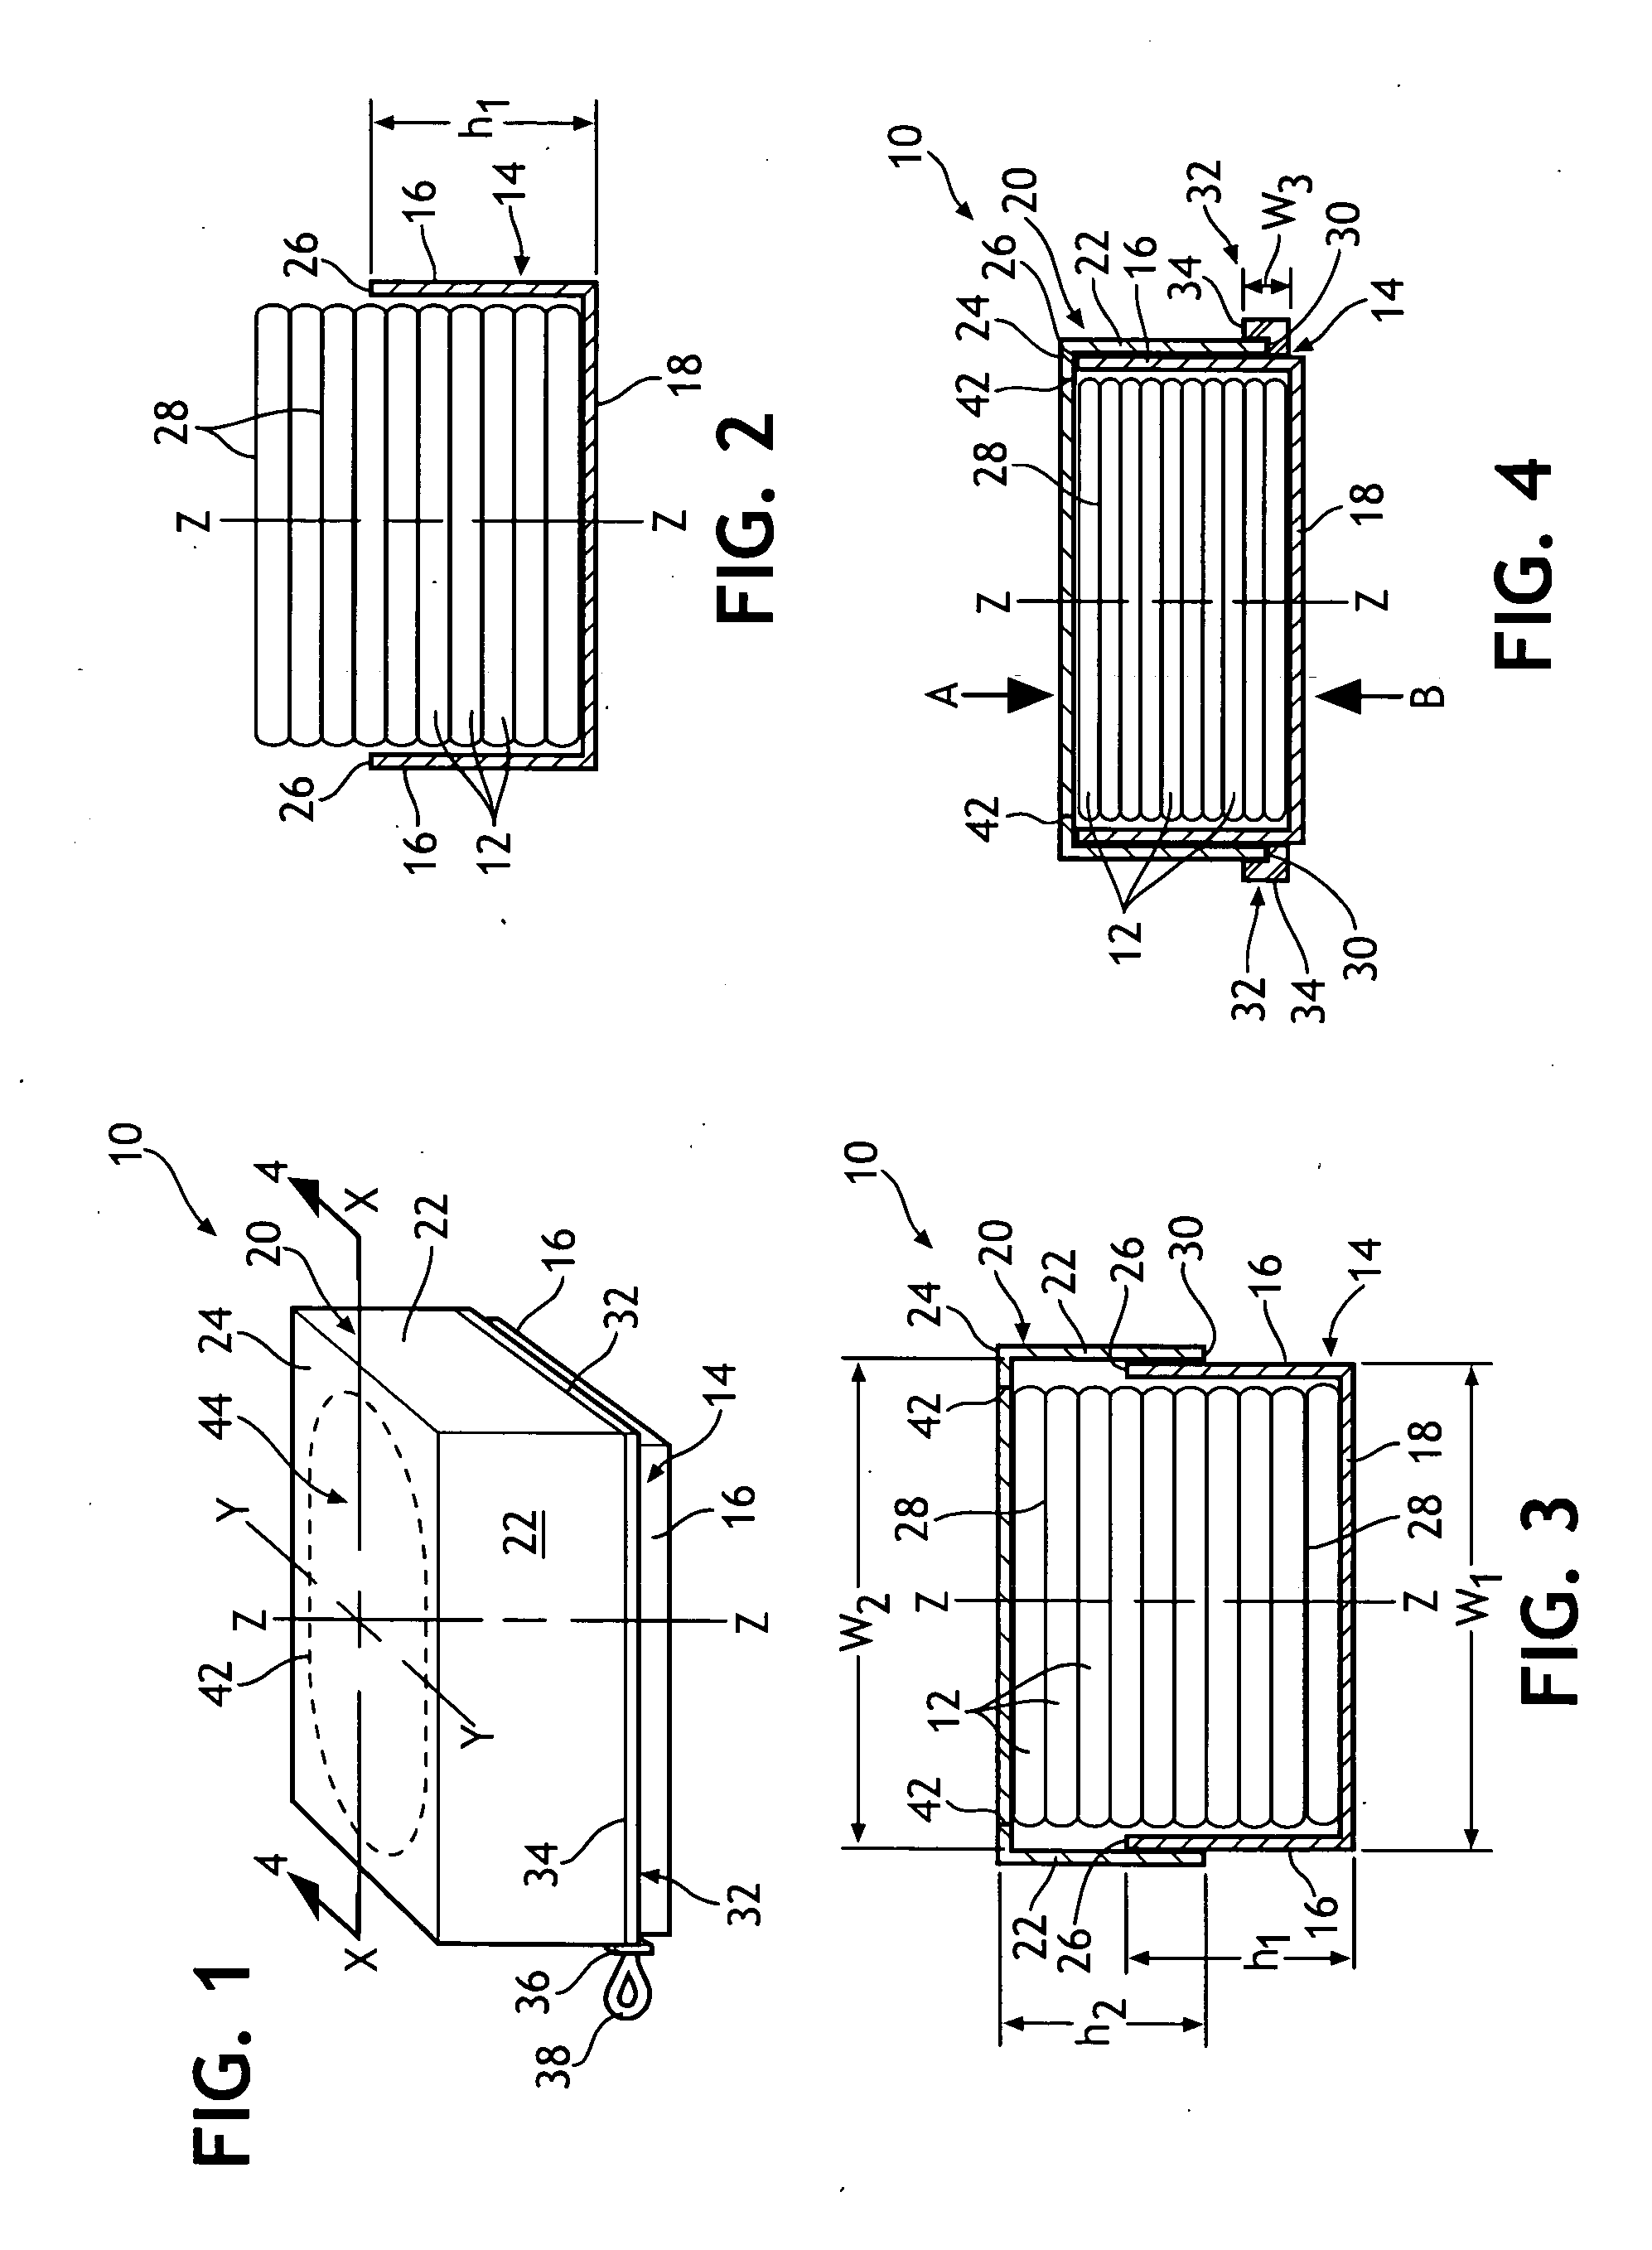 Package having an expansion mechanism